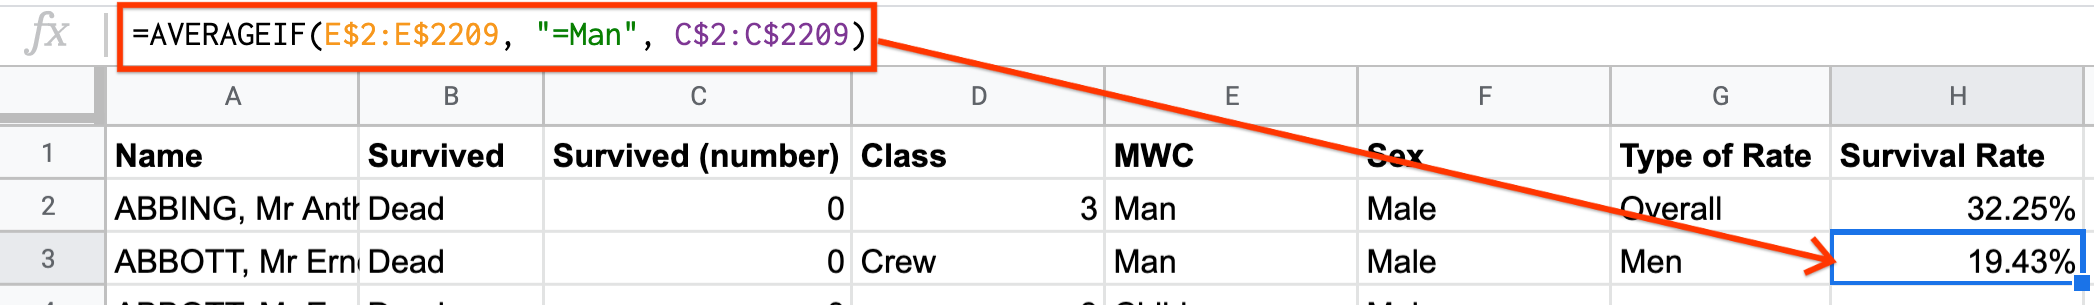 A screenshot from Sheets of a titanic passenger dataset using the average function to find the men's survival rate.